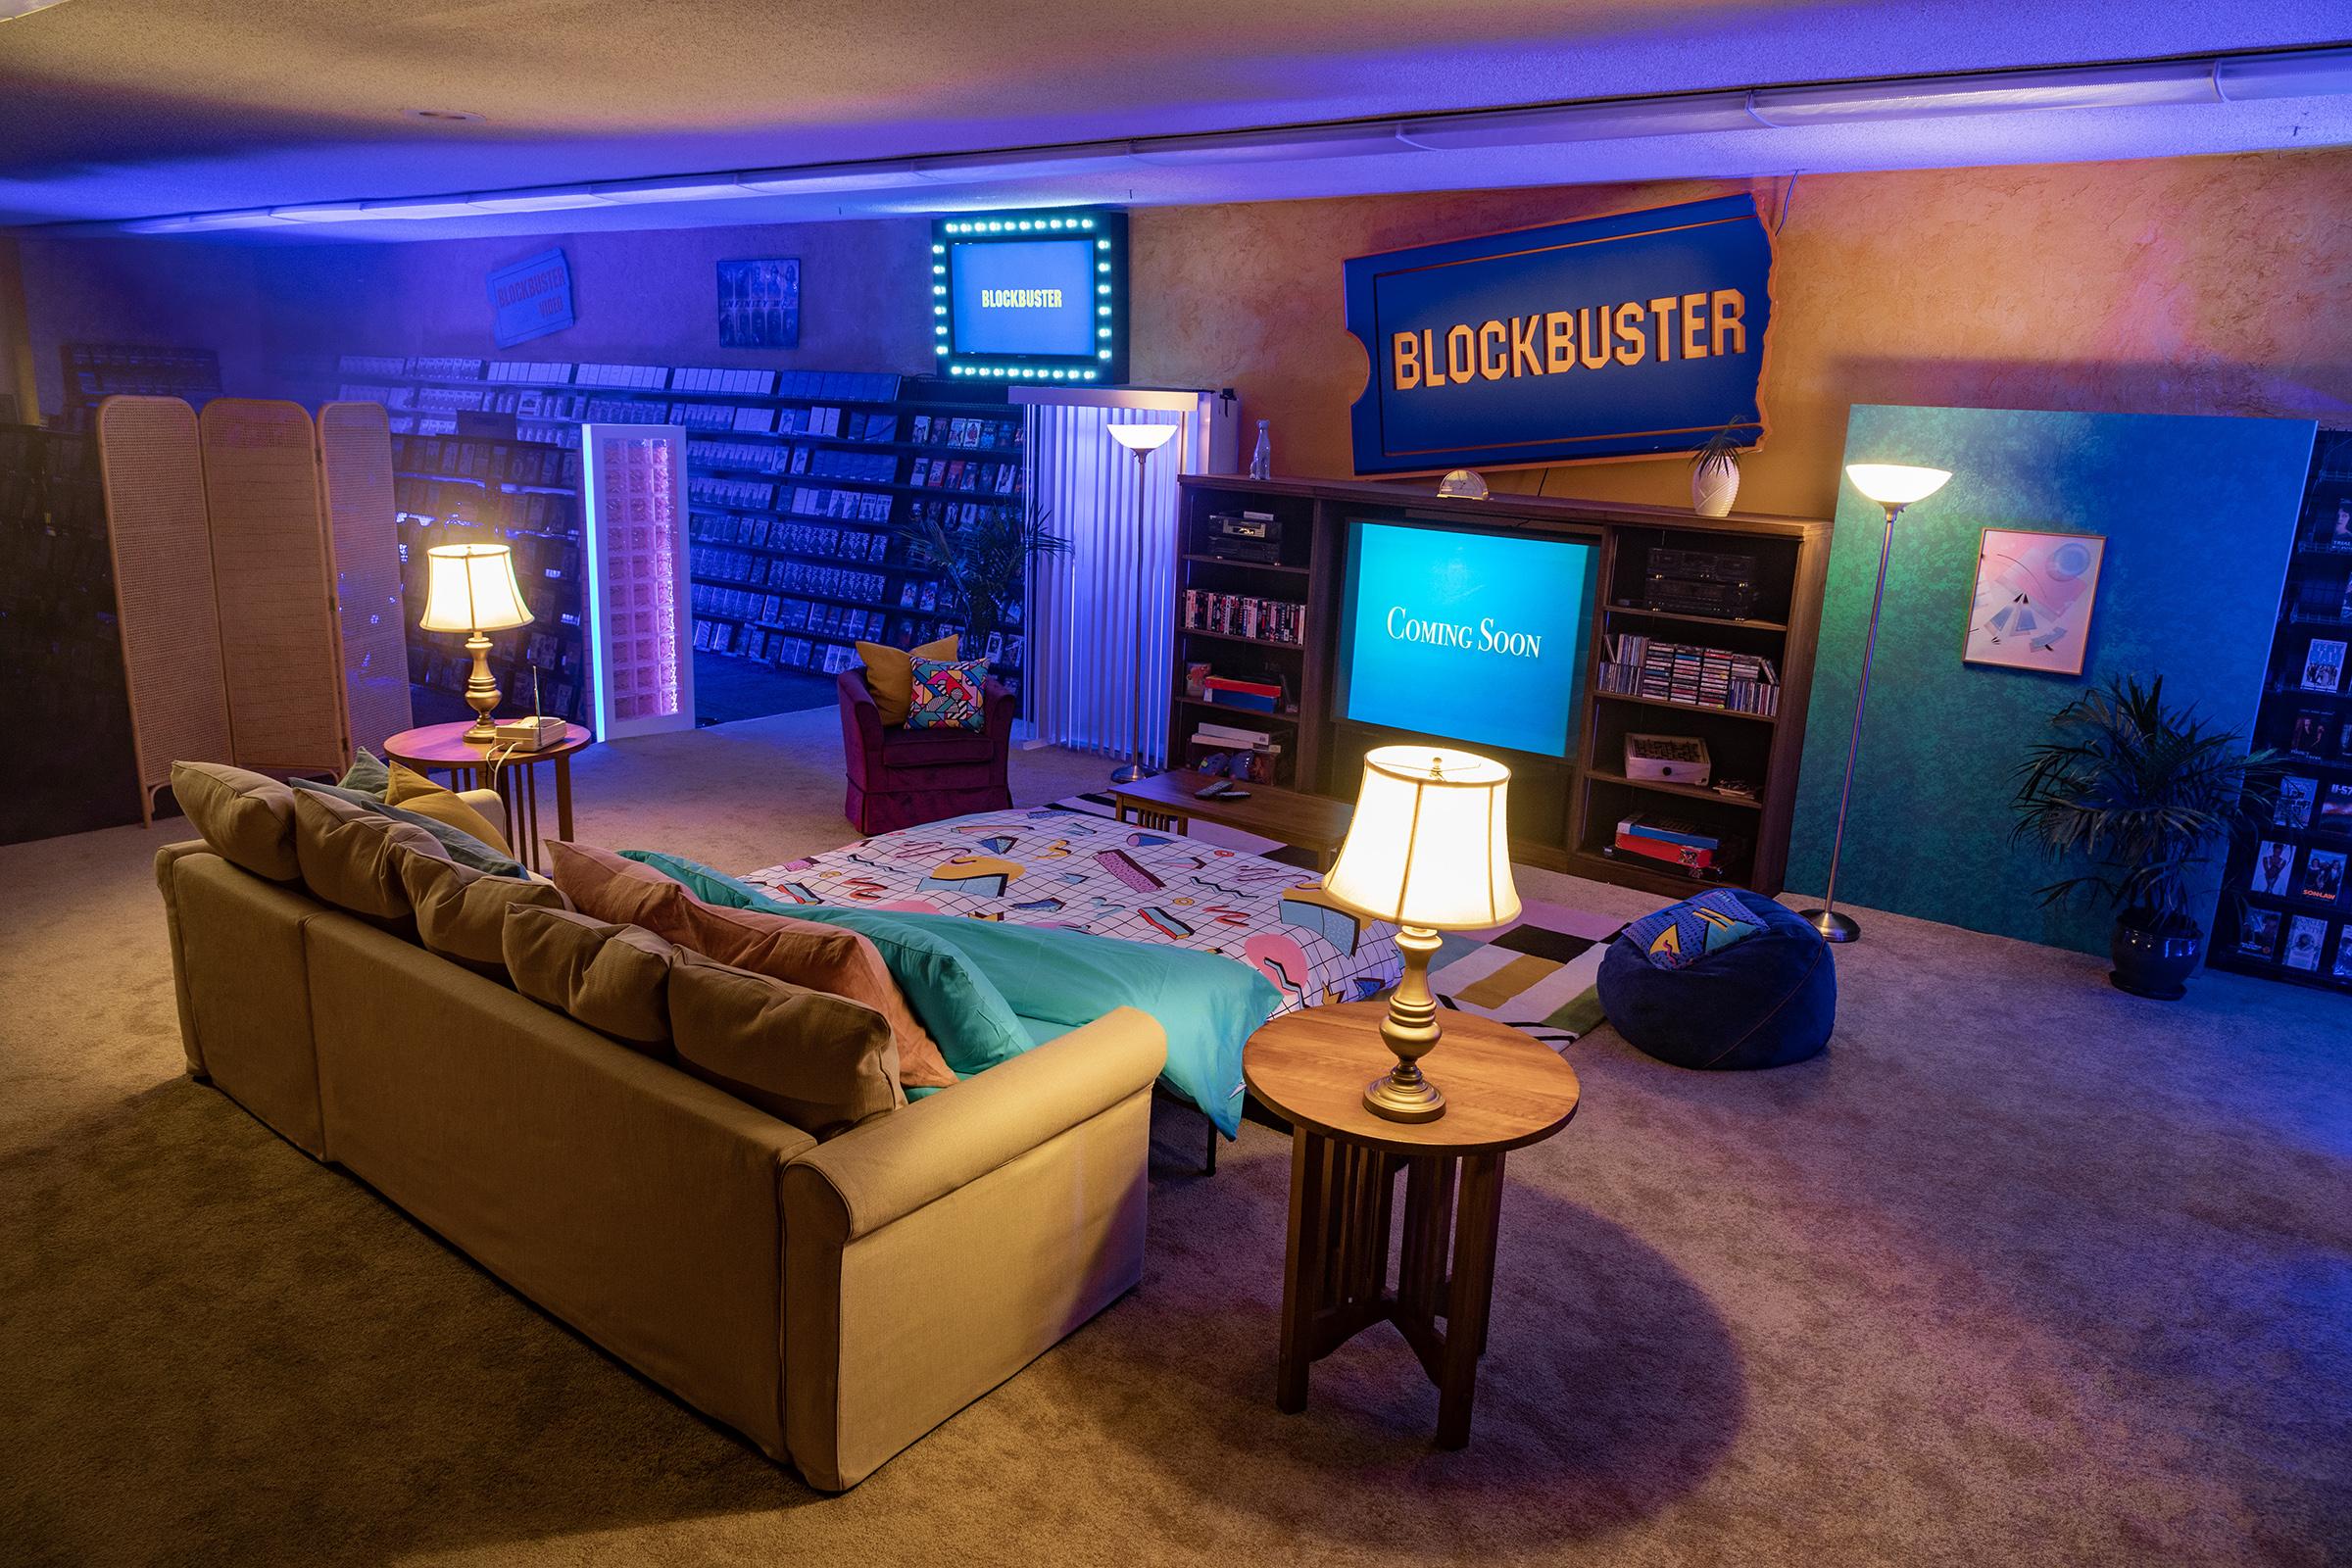 The world's last remaining Blockbuster video rental store has been turned into an Airbnb. Fans who stay will be able to get unlimited access to the shop's huge range of film titles, and will have a TV and a pull-out couch to watch them on. The 20-year-old store in Bend, Oregon, in the United States, is the last remaining store in the once hugely popular video rental chain. The store rents film titles at $3.99 USD - and a stay is just $4 USD, plus taxes and fees. Store manager Sandi Harding has converted a section of the store for the “End of Summer Sleepover”, which will allow film lovers to access the store for three one-night stays in September. It has been listed on holiday accommodation site, Airbnb for local residents. "This end of summer sleepover will offer movie lovers in Deschutes County, Oregon the chance for a 90s-themed stay to relive the bygone Friday night tradition just as we remember it," they said. "As the Airbnb host, Sandi will stock the shelves with all the movies a heart could desire before handing over the keys." At its peak, Blockbuster had over 9000 stores around the world. In December 2013, the long-running rental chain called in administrators in the UK. Please credit AIRBNB/MEGA. 12 Aug 2020 Pictured: Inside the Airbnb. Photo credit: AIRBNB/MEGA TheMegaAgency.com +1 888 505 6342 (Mega Agency TagID: MEGA693817_003.jpg) [Photo via Mega Agency]